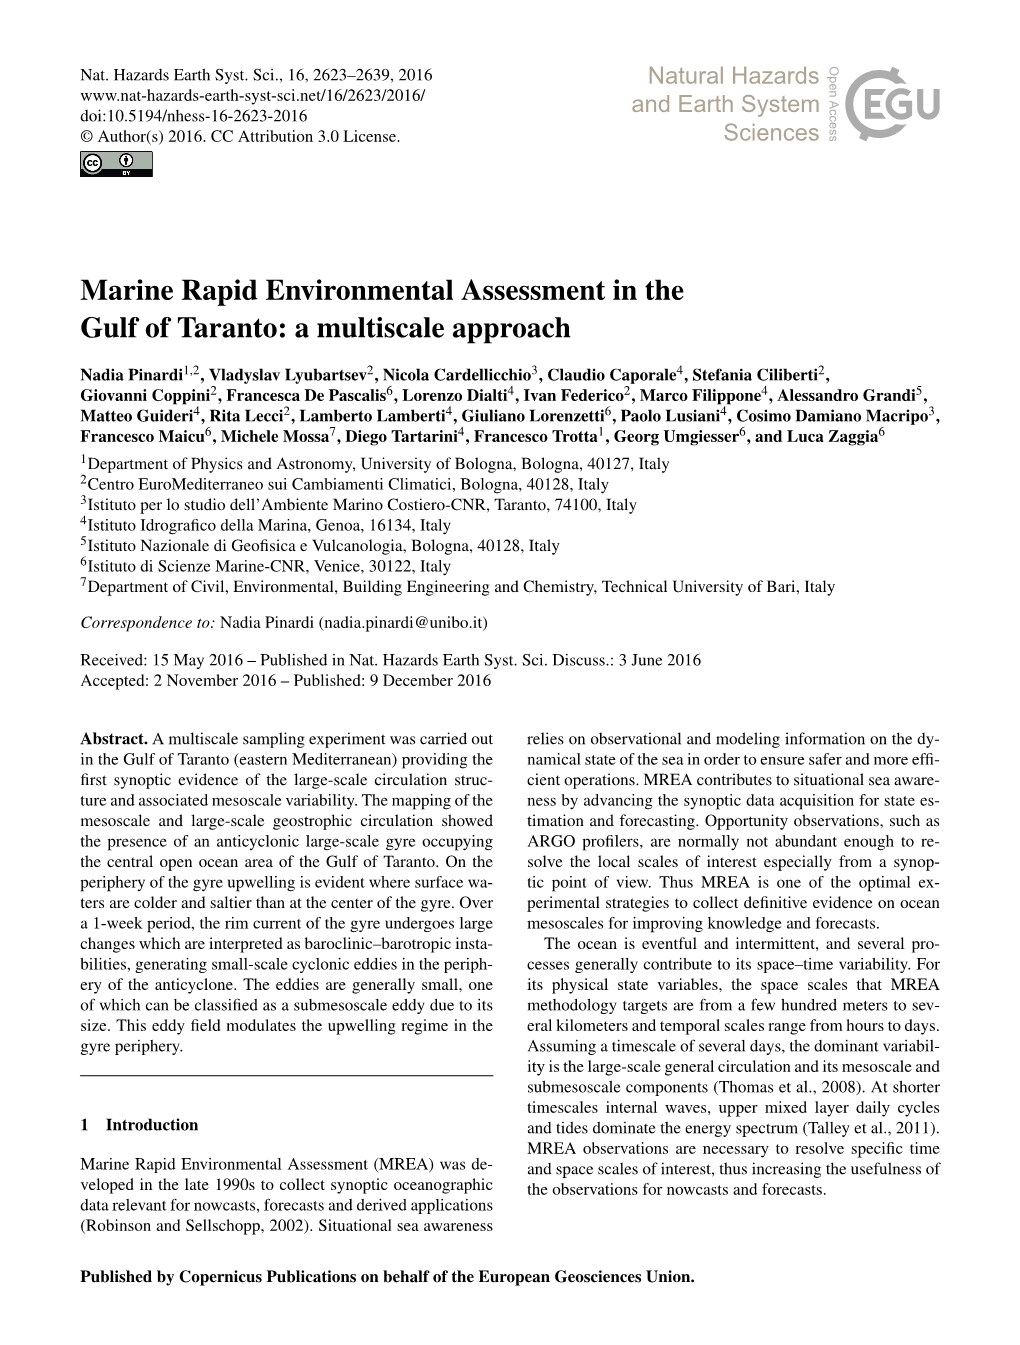 Marine Rapid Environmental Assessment in the Gulf of Taranto: a Multiscale Approach